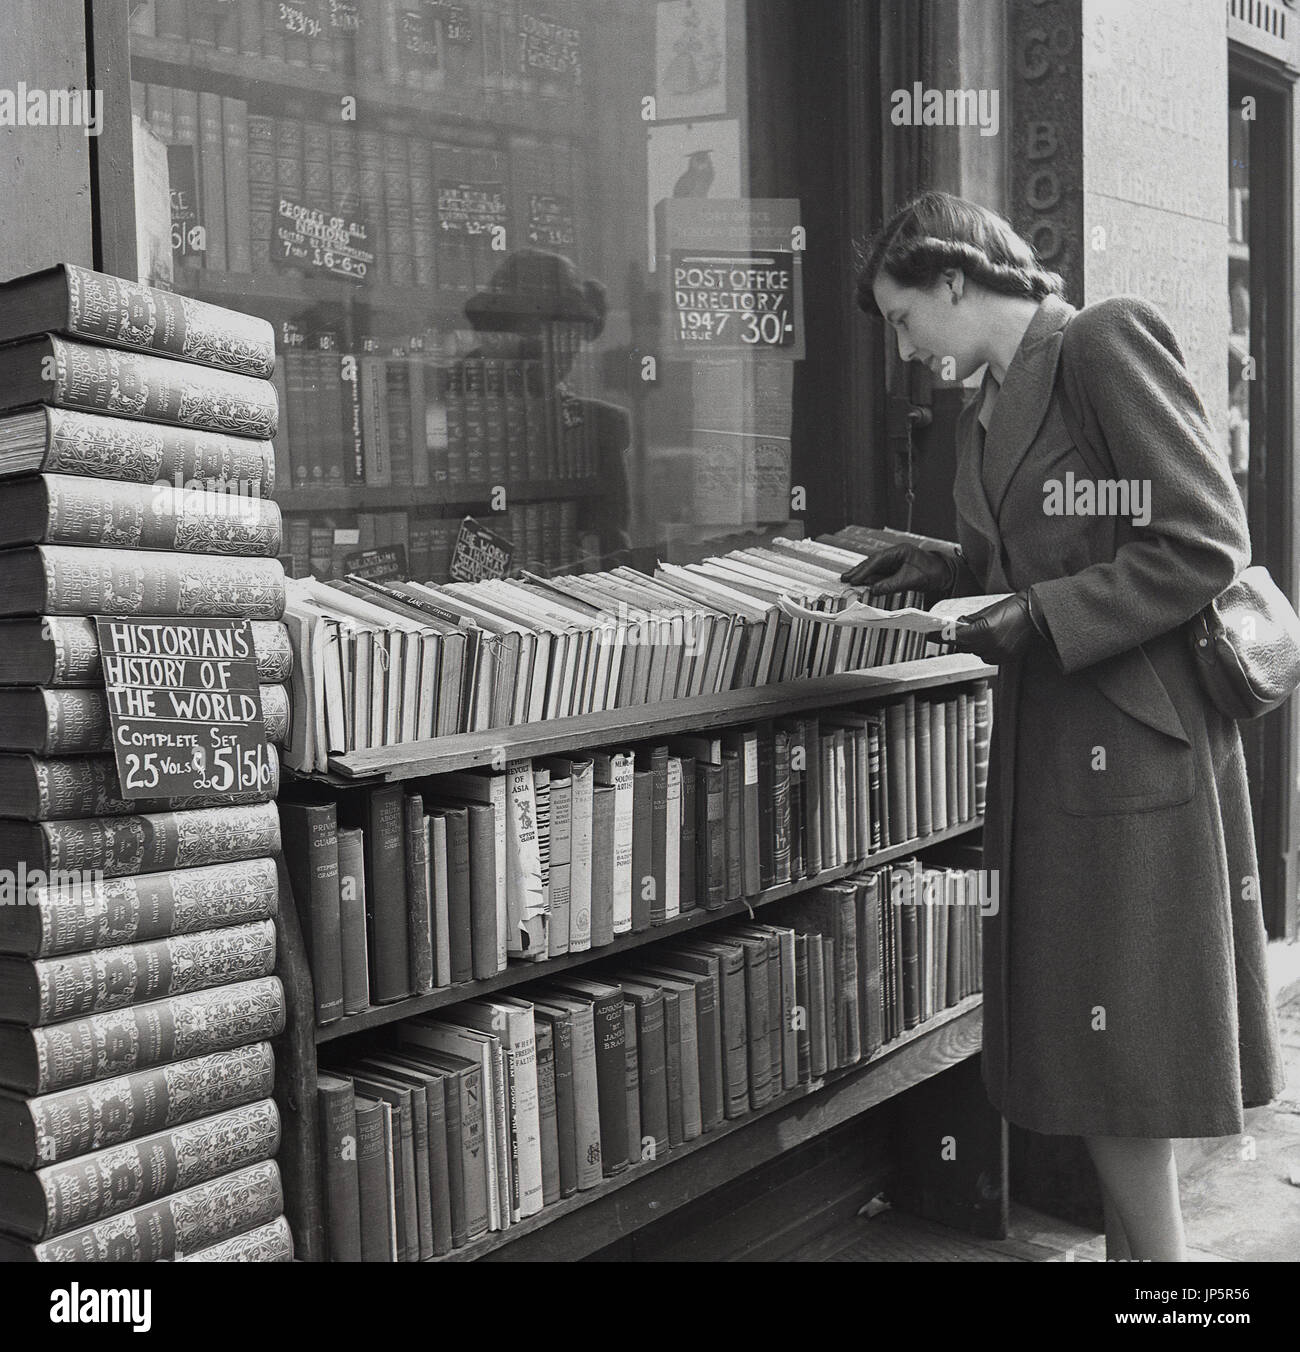 1948, Historical, England, Charing Cross Rd, London, a young lady browses the rows of second-hand hardback books stacked outside an antiquarian bookshop. Stock Photo